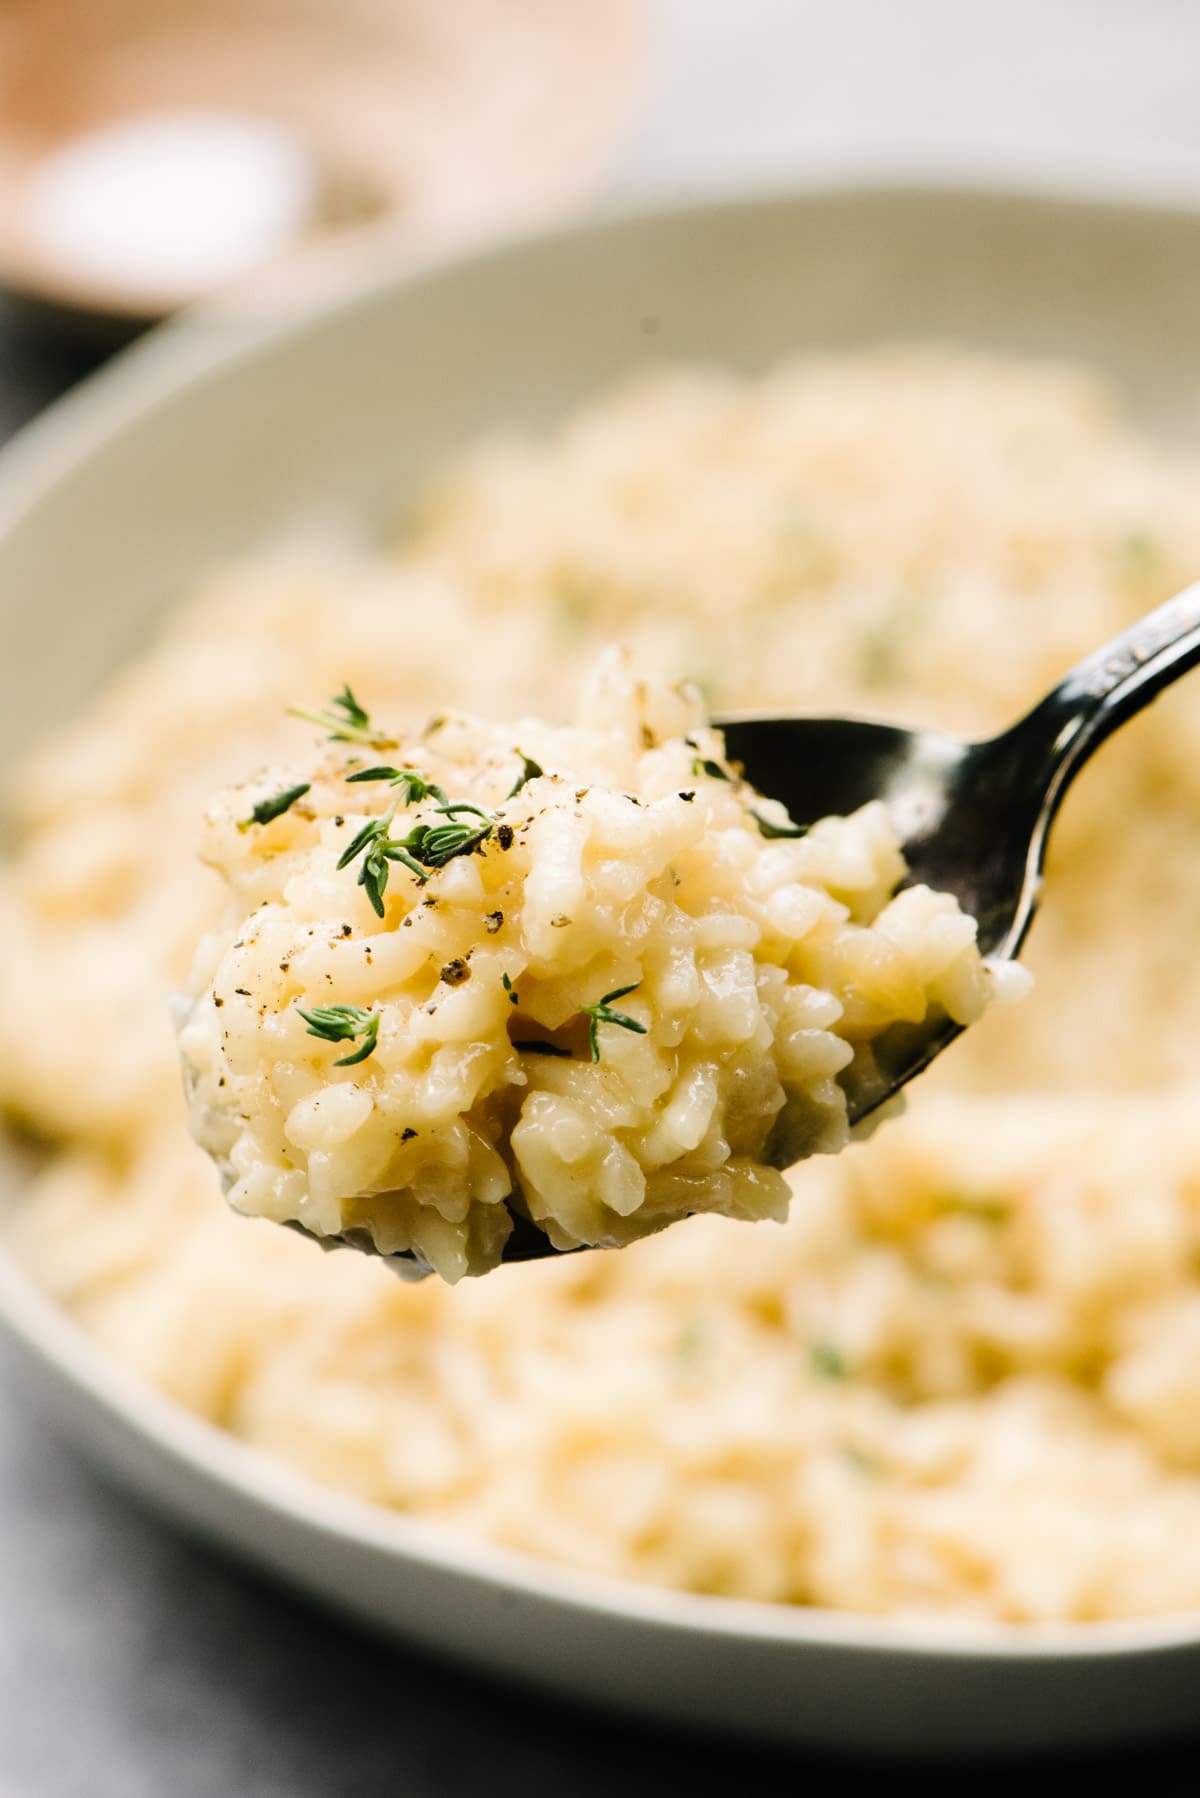 A spoonful of risotto hovering over a bowl, showing the rich and creamy texture.